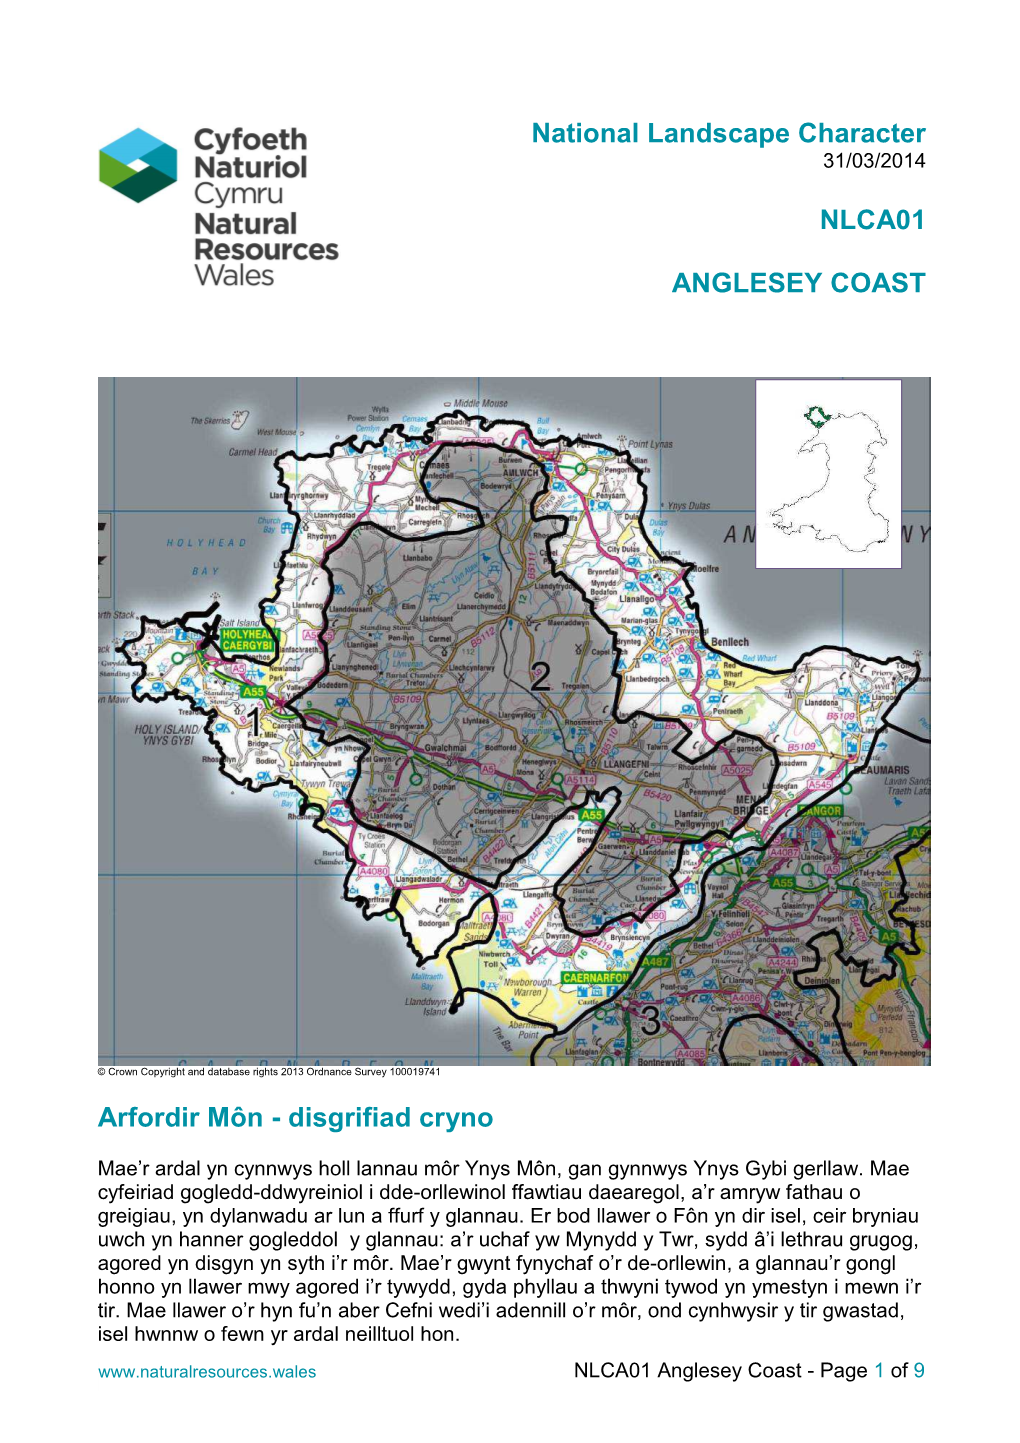 NLCA01 Anglesey Coast - Page 1 of 9